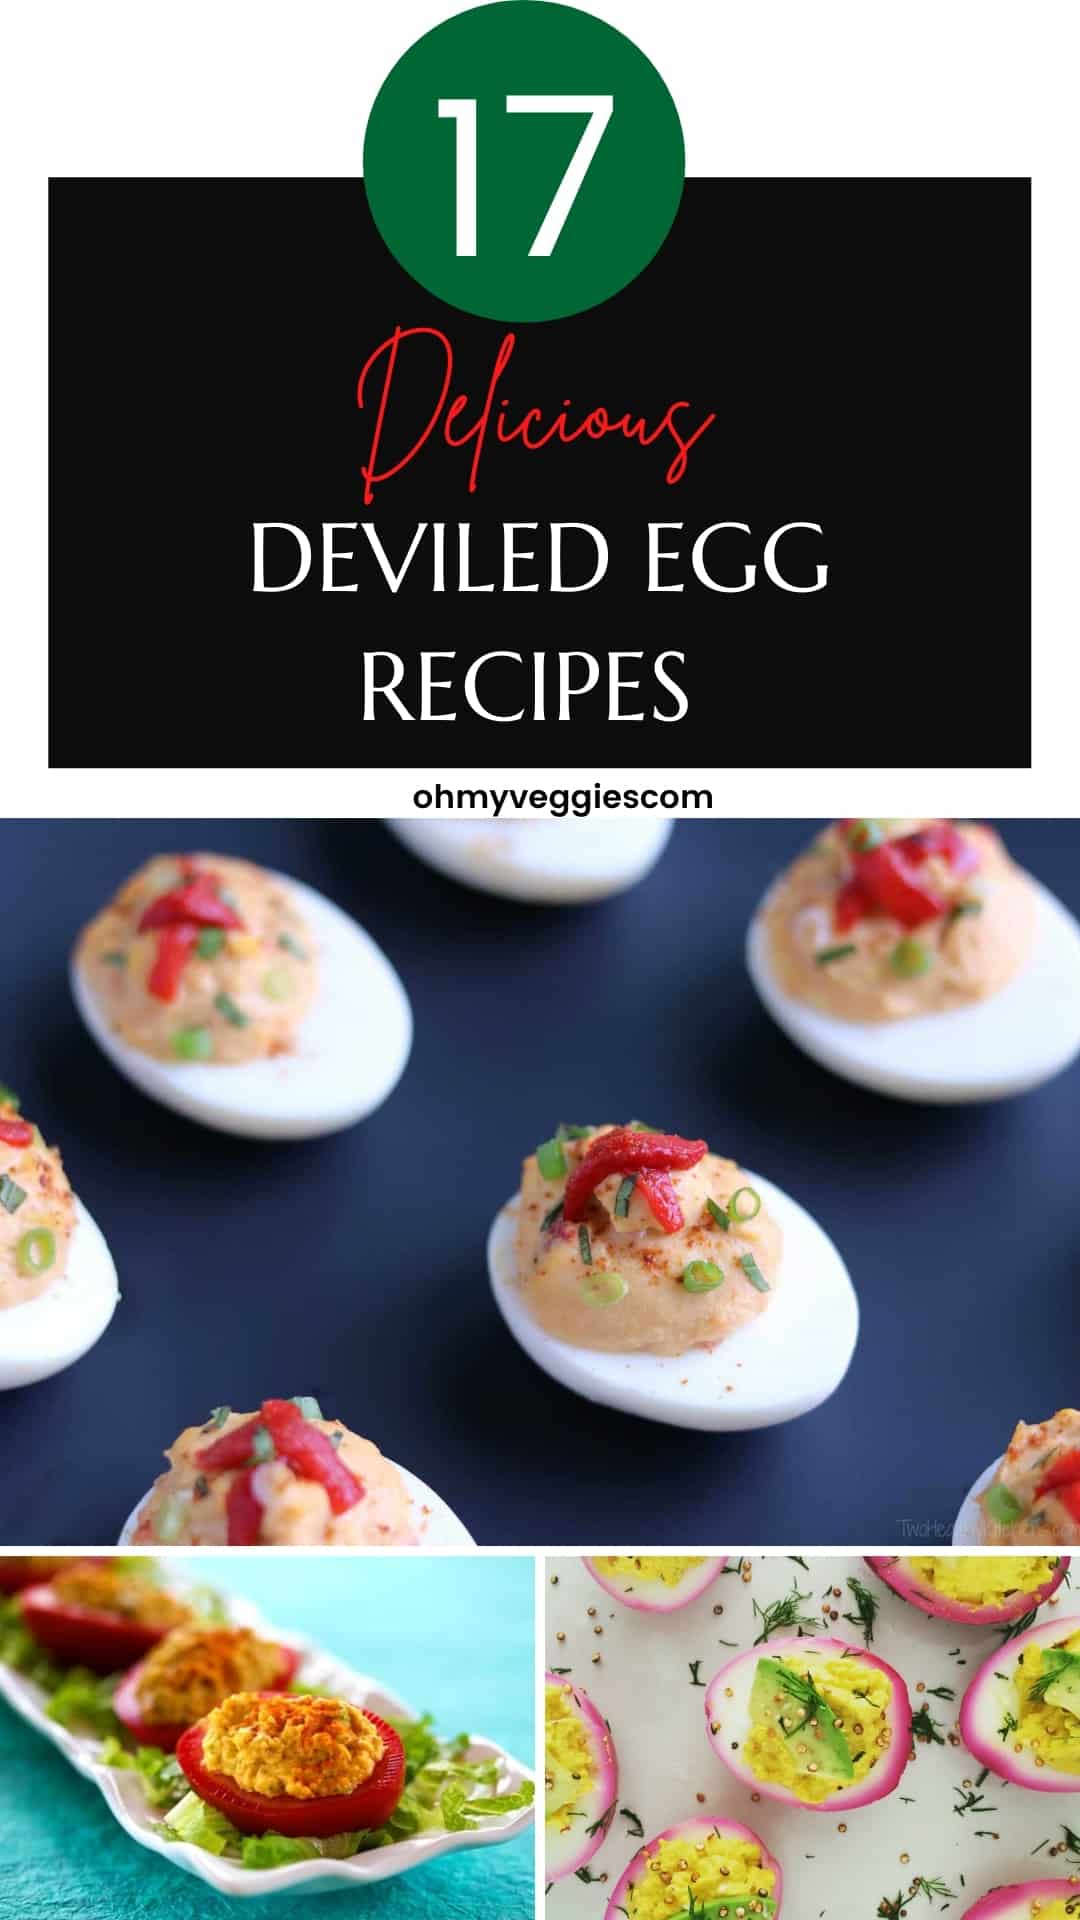 17 Delicious Deviled Egg Recipes | Oh My Veggies